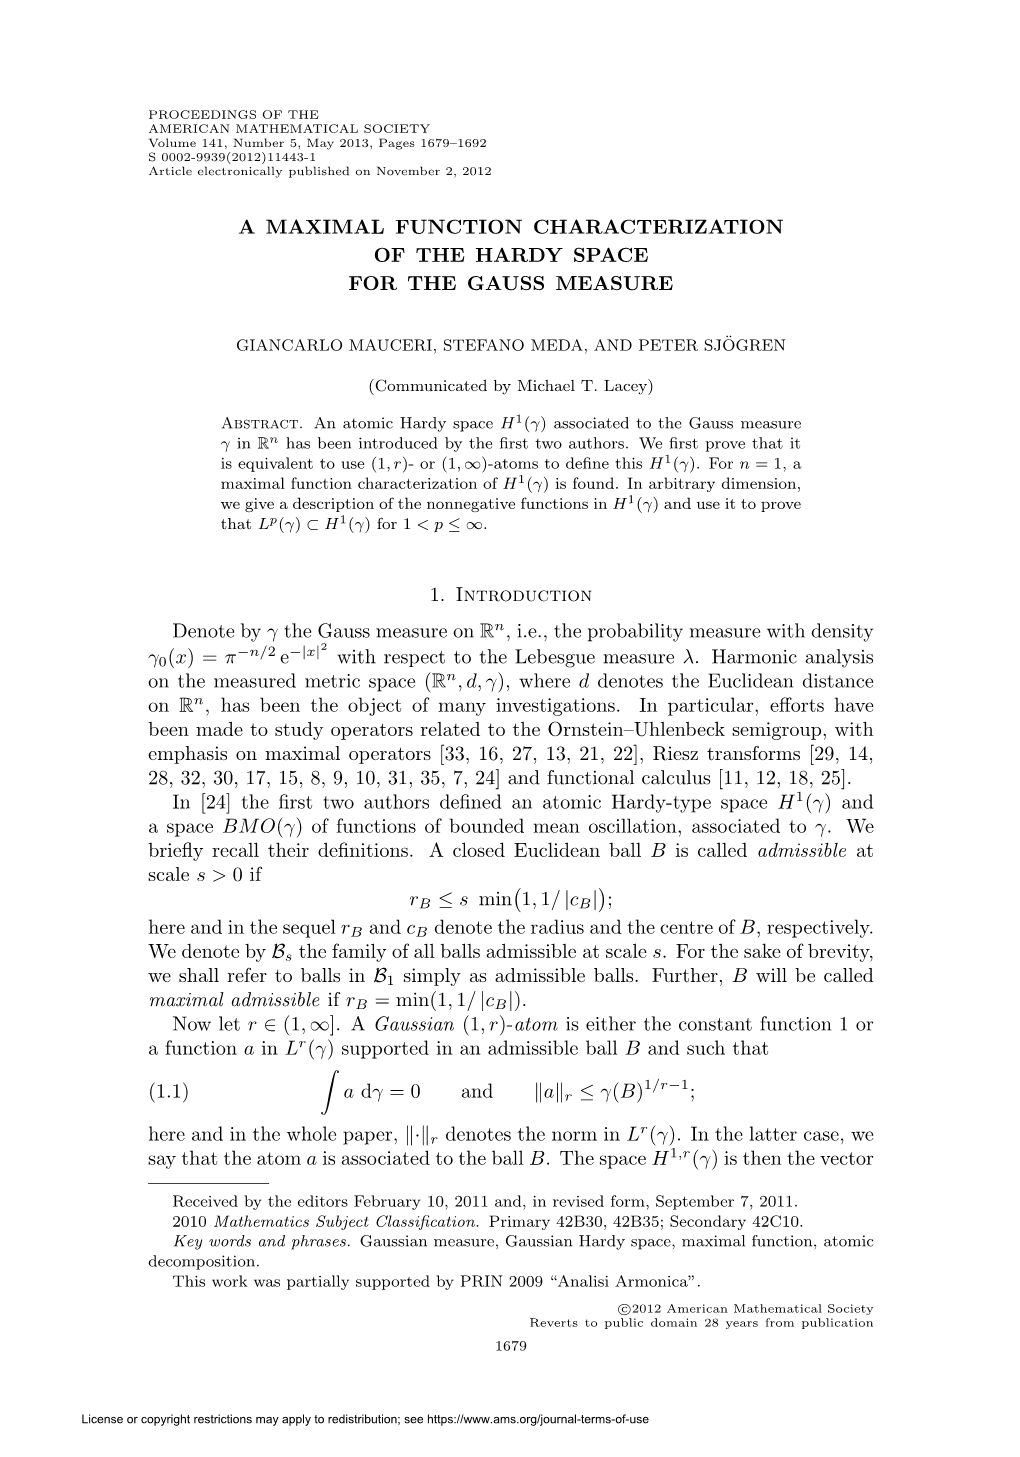 A Maximal Function Characterization of the Hardy Space for the Gauss Measure